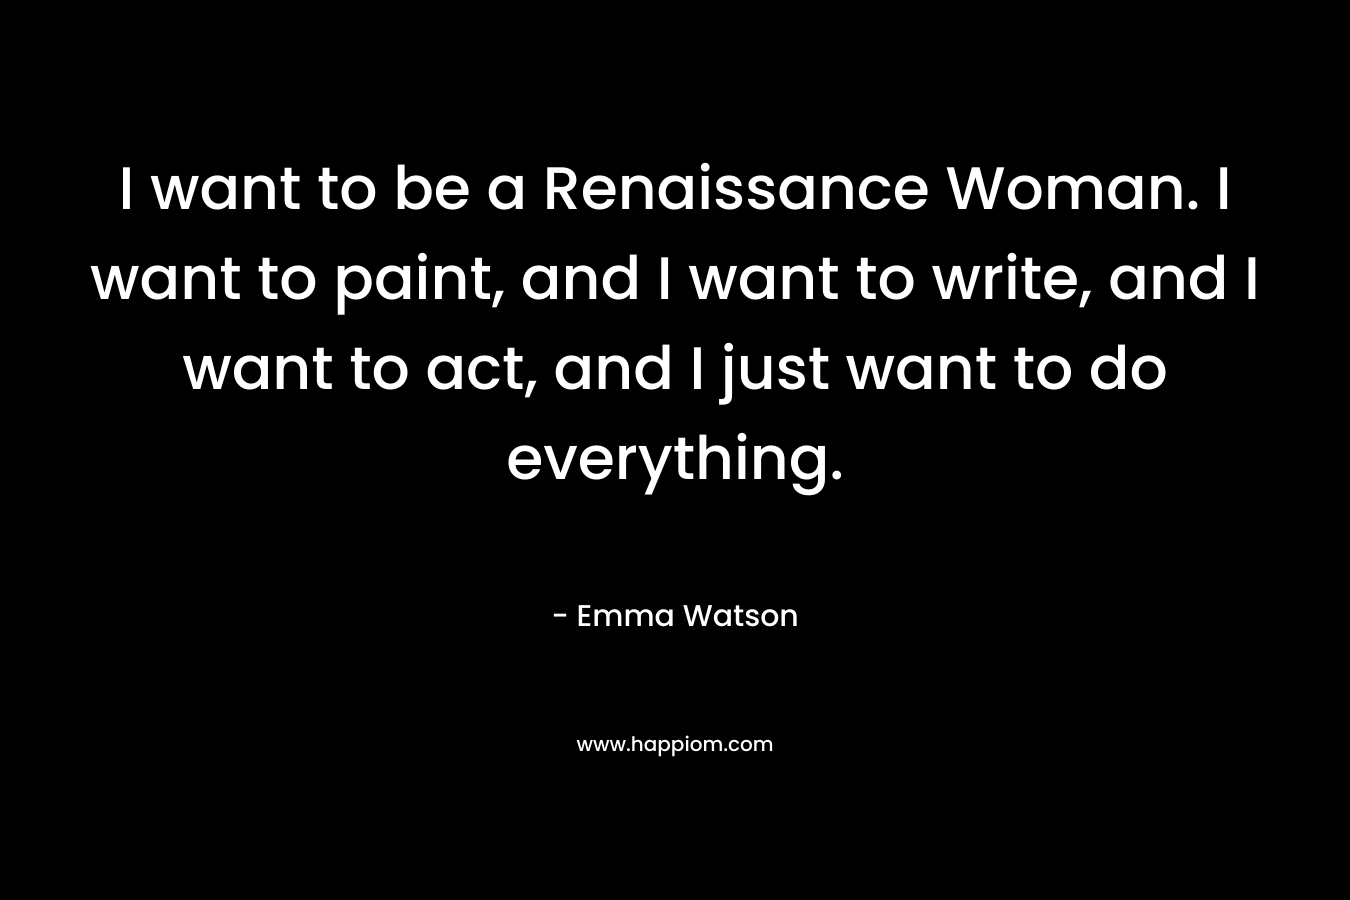 I want to be a Renaissance Woman. I want to paint, and I want to write, and I want to act, and I just want to do everything.